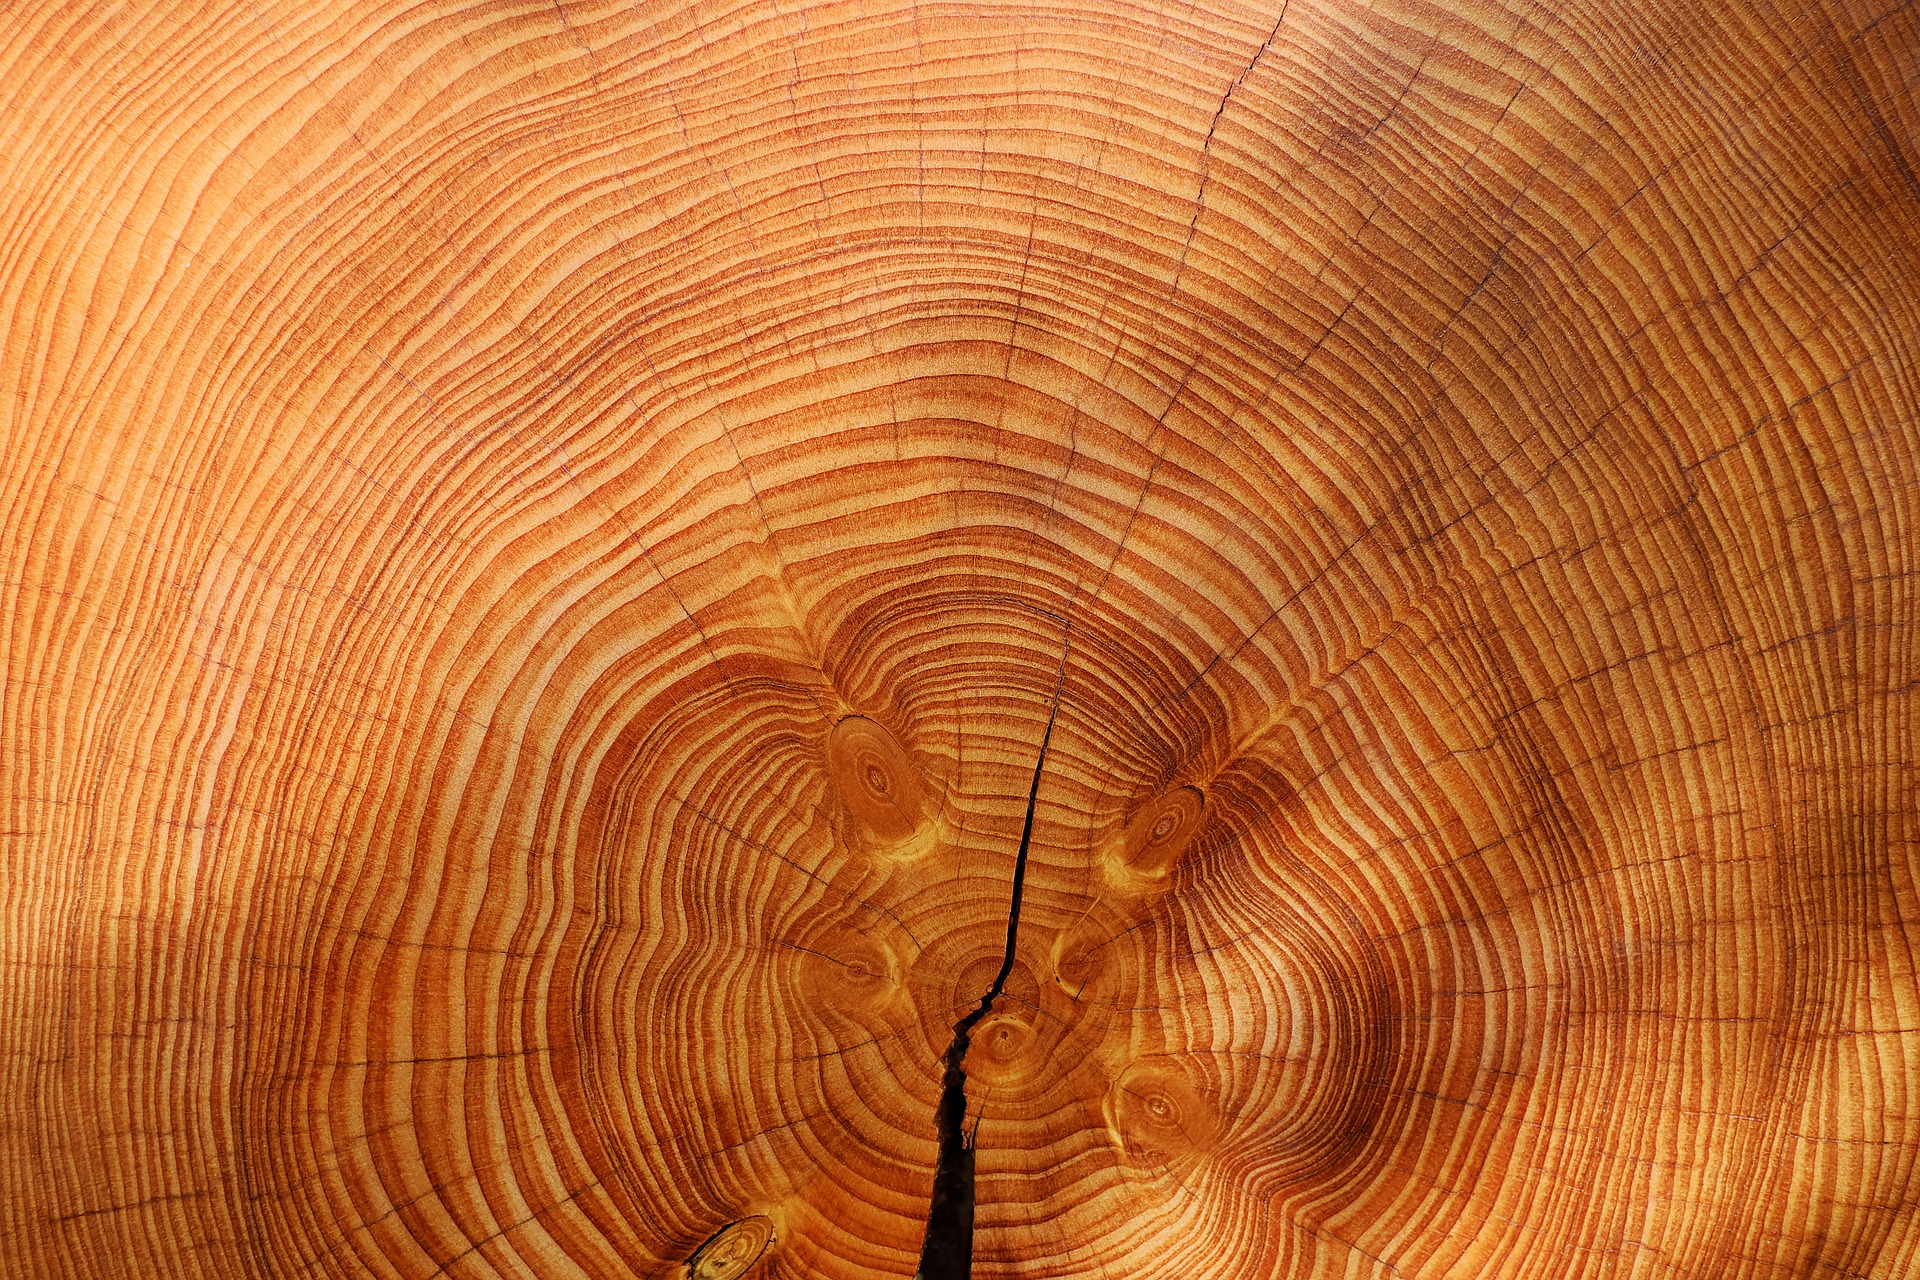 Tree ring visualized